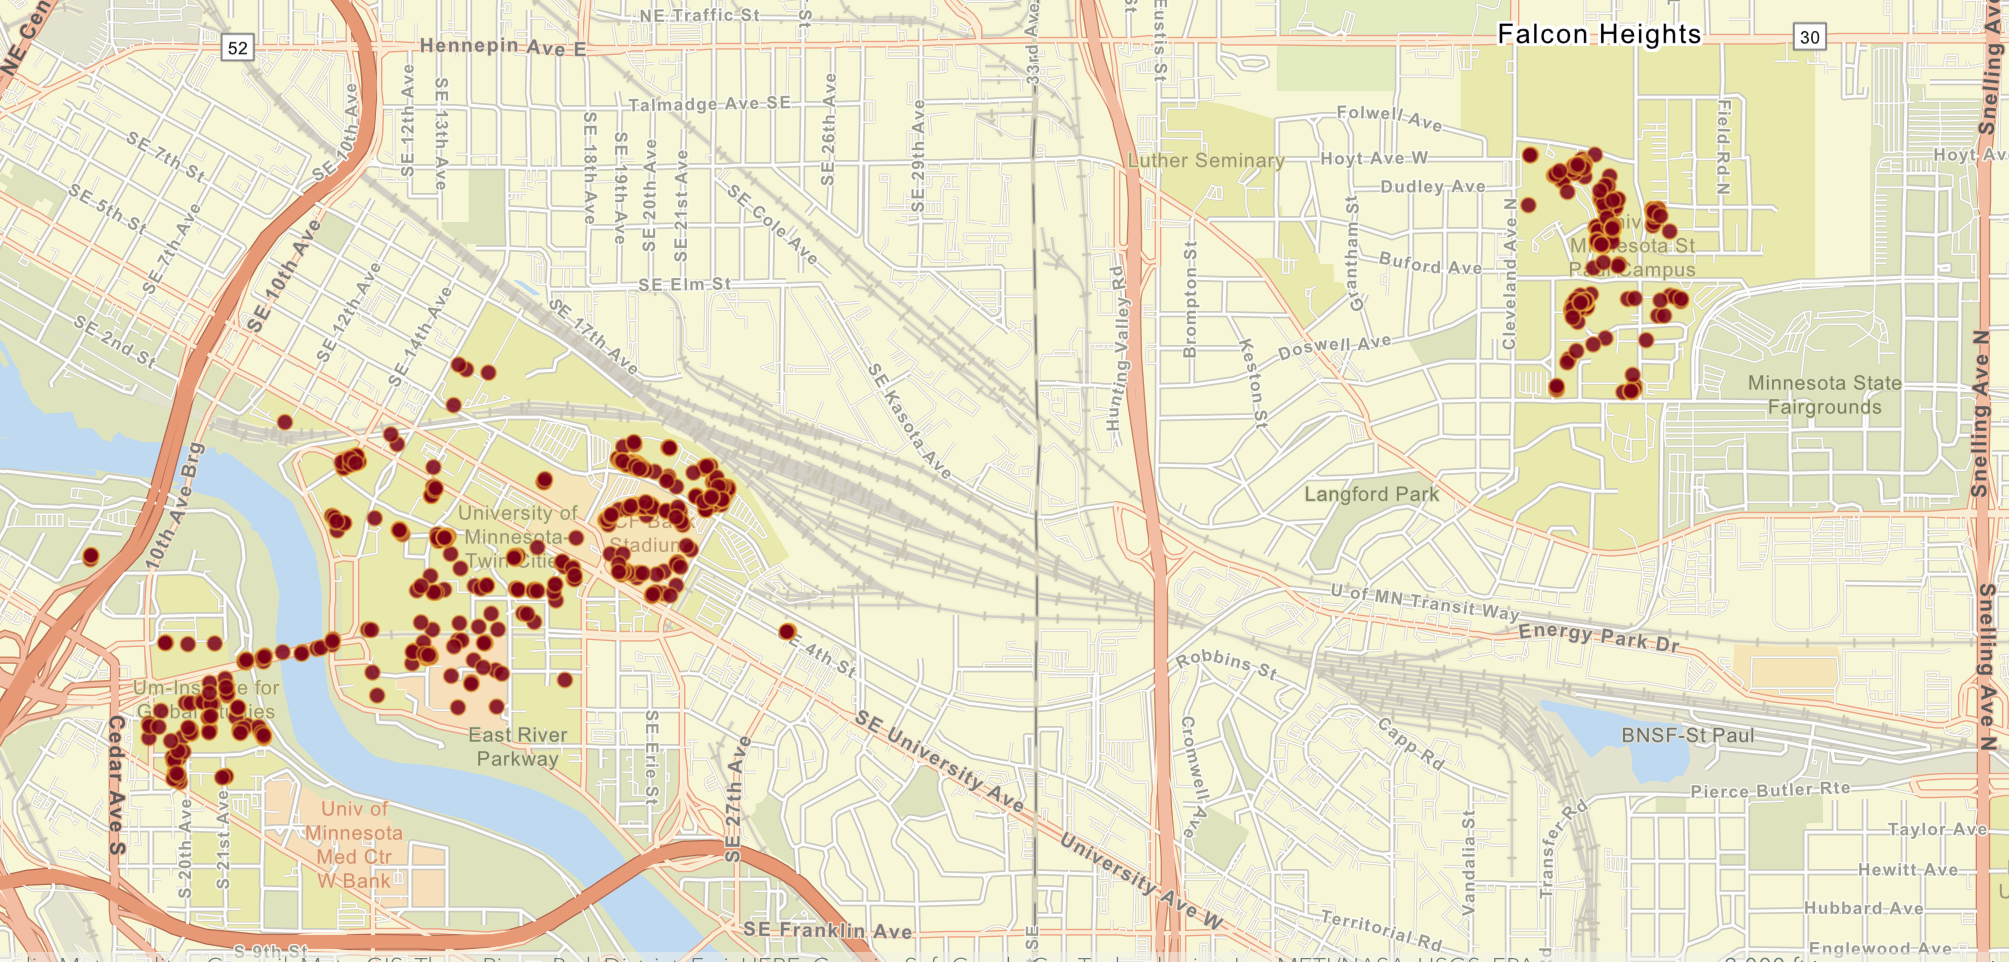 Stop the Thud! Collision Map displaying sites of bird collisions on the Twin Cities campuses